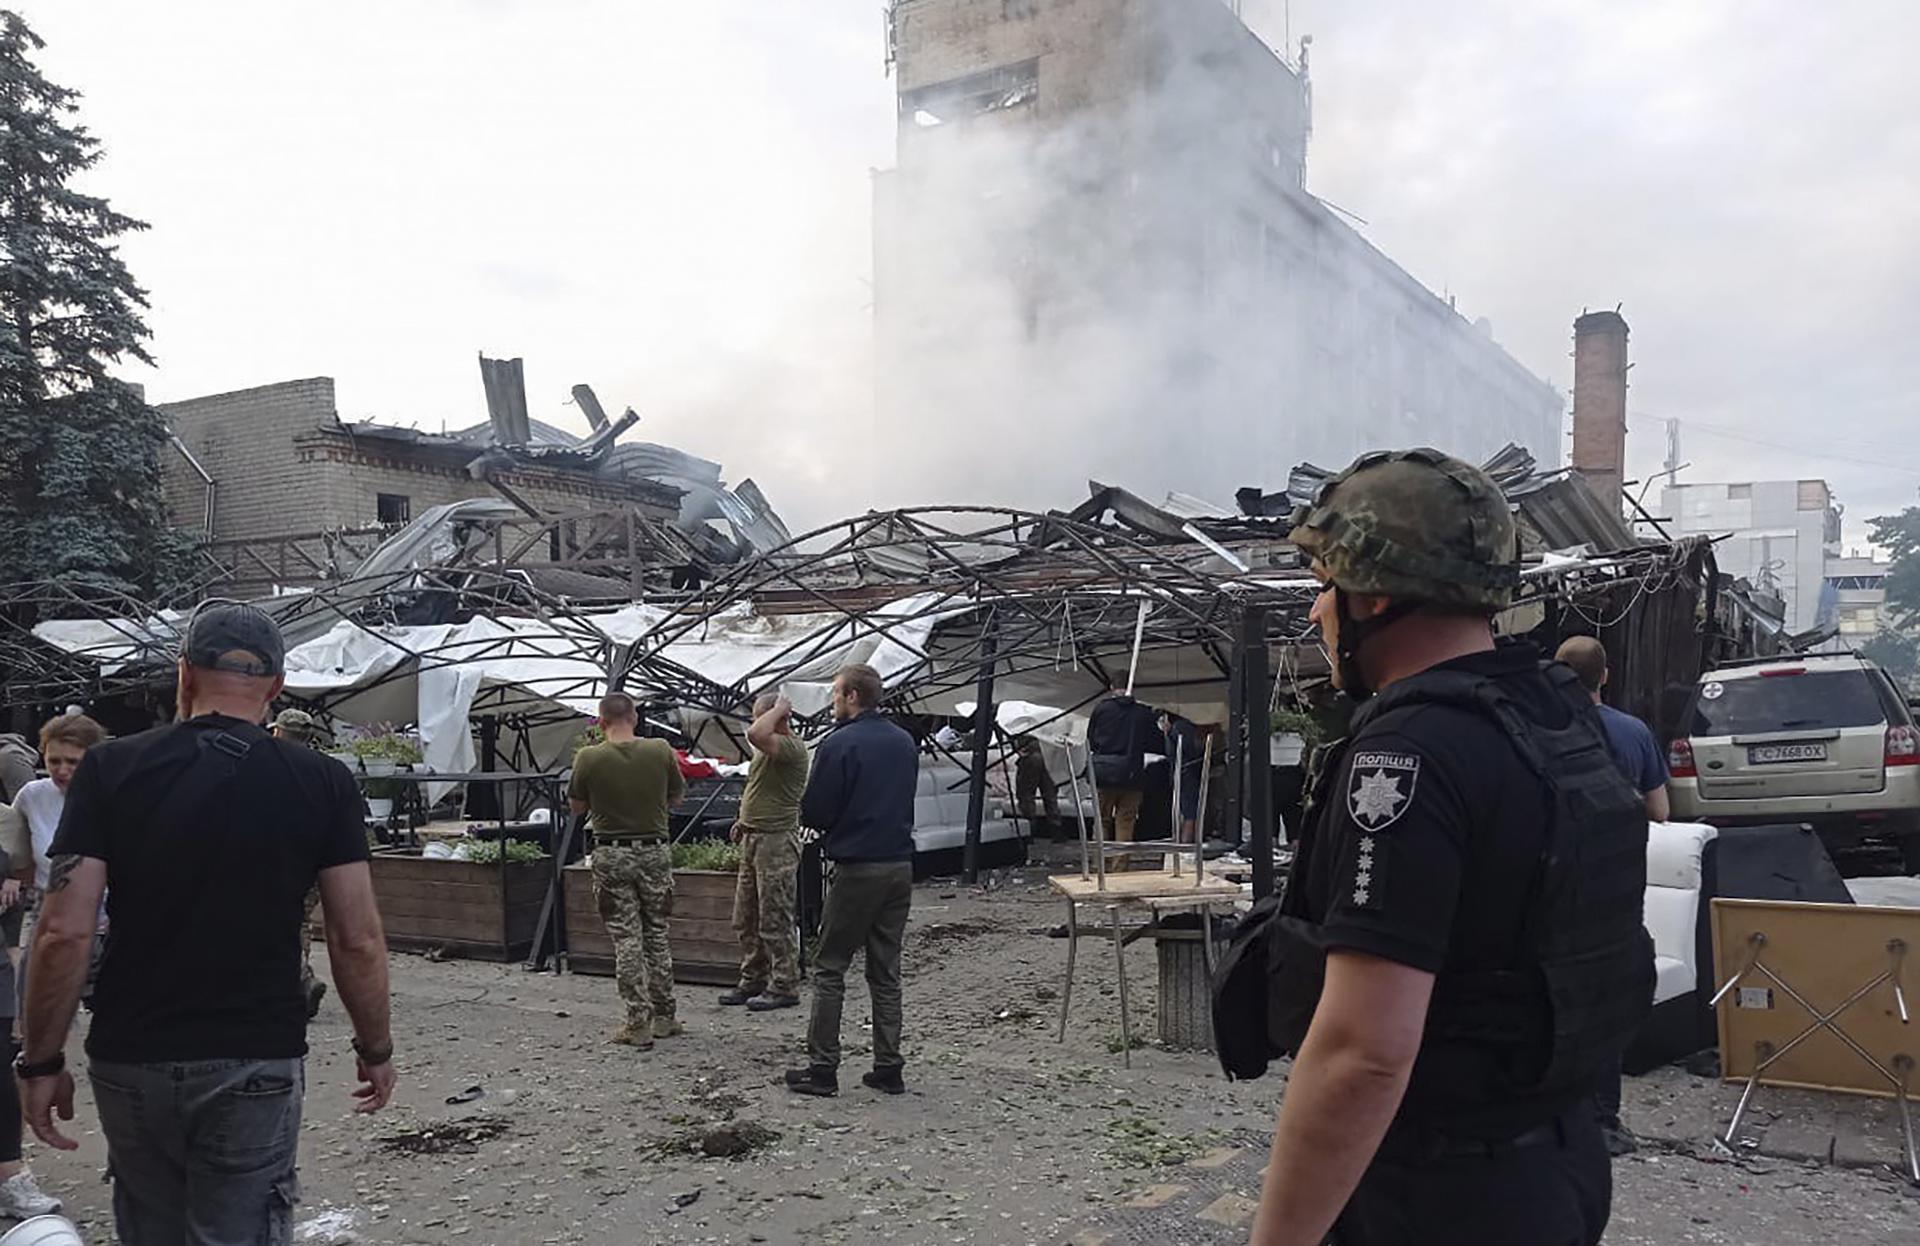 Four people died and 42 others sustained varying degrees of injuries on 27 June 2023 in a Russian missile strike on a busy restaurant and shopping zone of the eastern Ukrainian city of Kramatorsk, Ukrainian officials said. EFE/EPA/National police of Ukraine